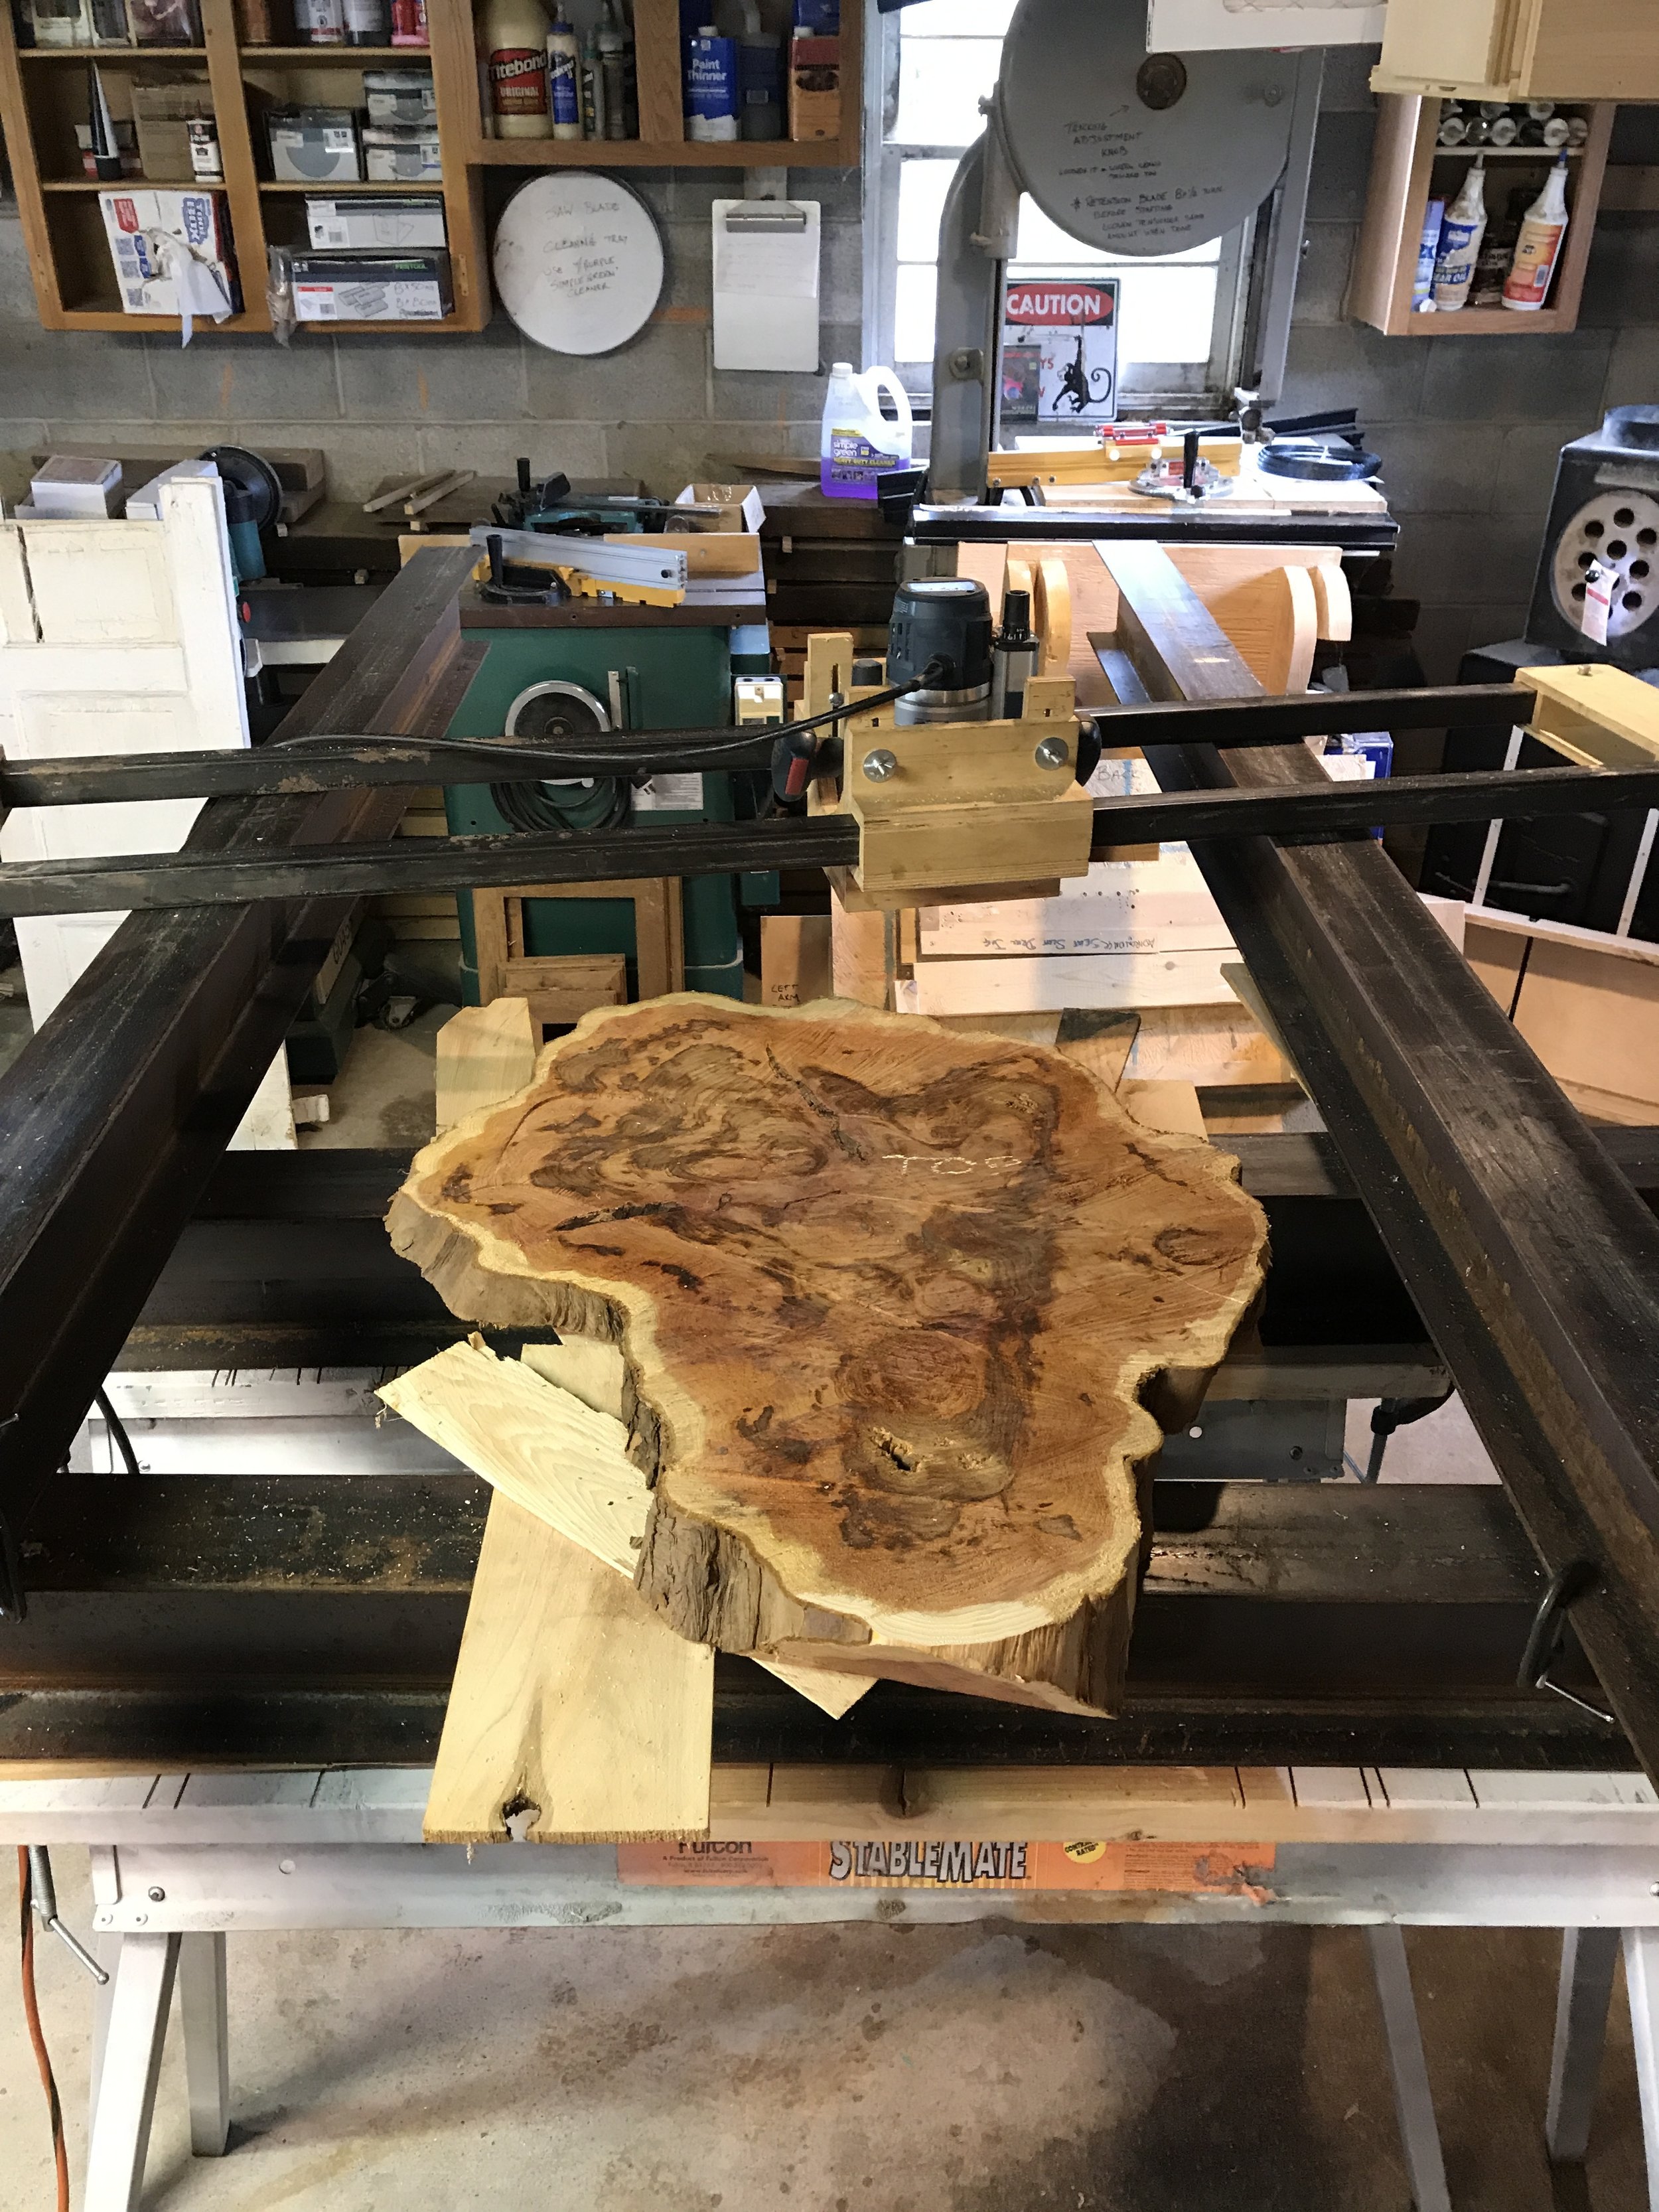  A client had a large yew bush cut down on their property and brought me a slab from the stump to use for an outdoor table. Since it was freshly cut, it had to dry for a year or so on my racks before it was ready for use. After it had dried, I put it